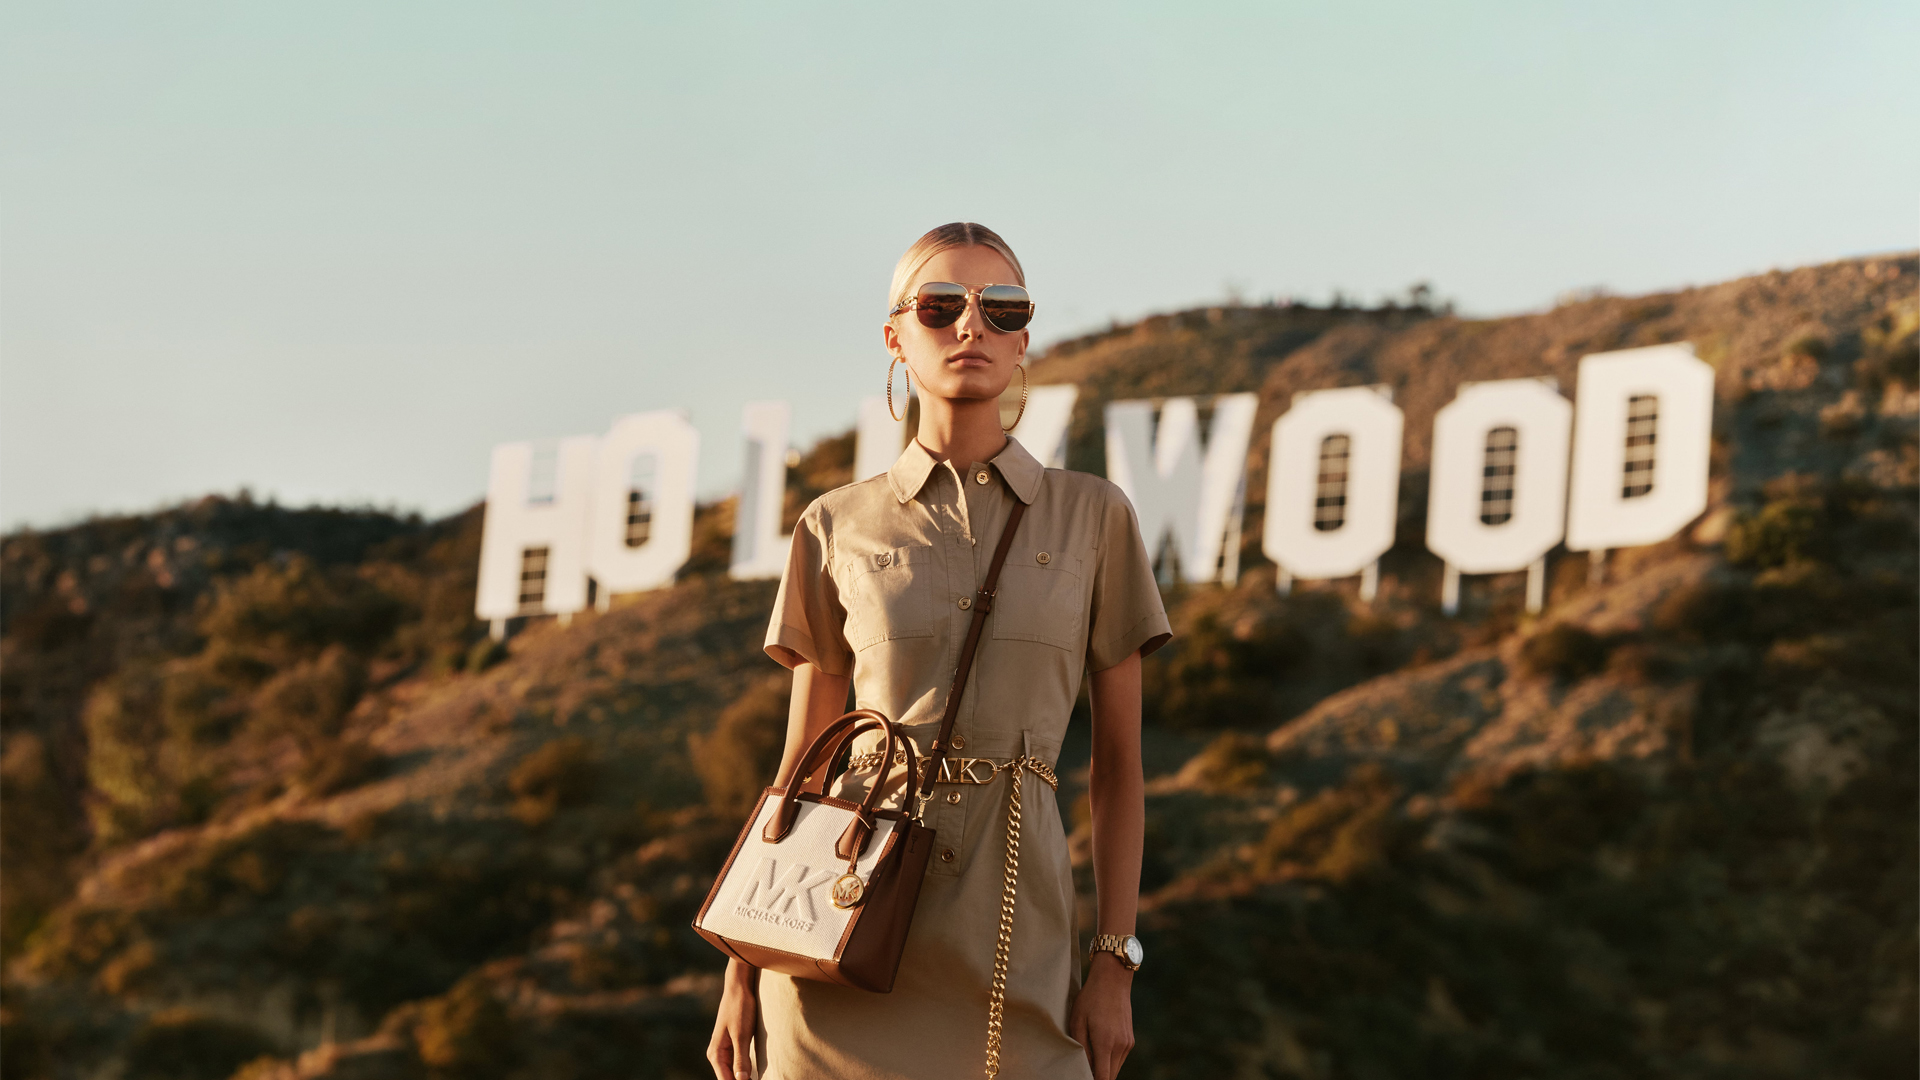 Find discounted prices at Michael kors  Outlet Village Dubai